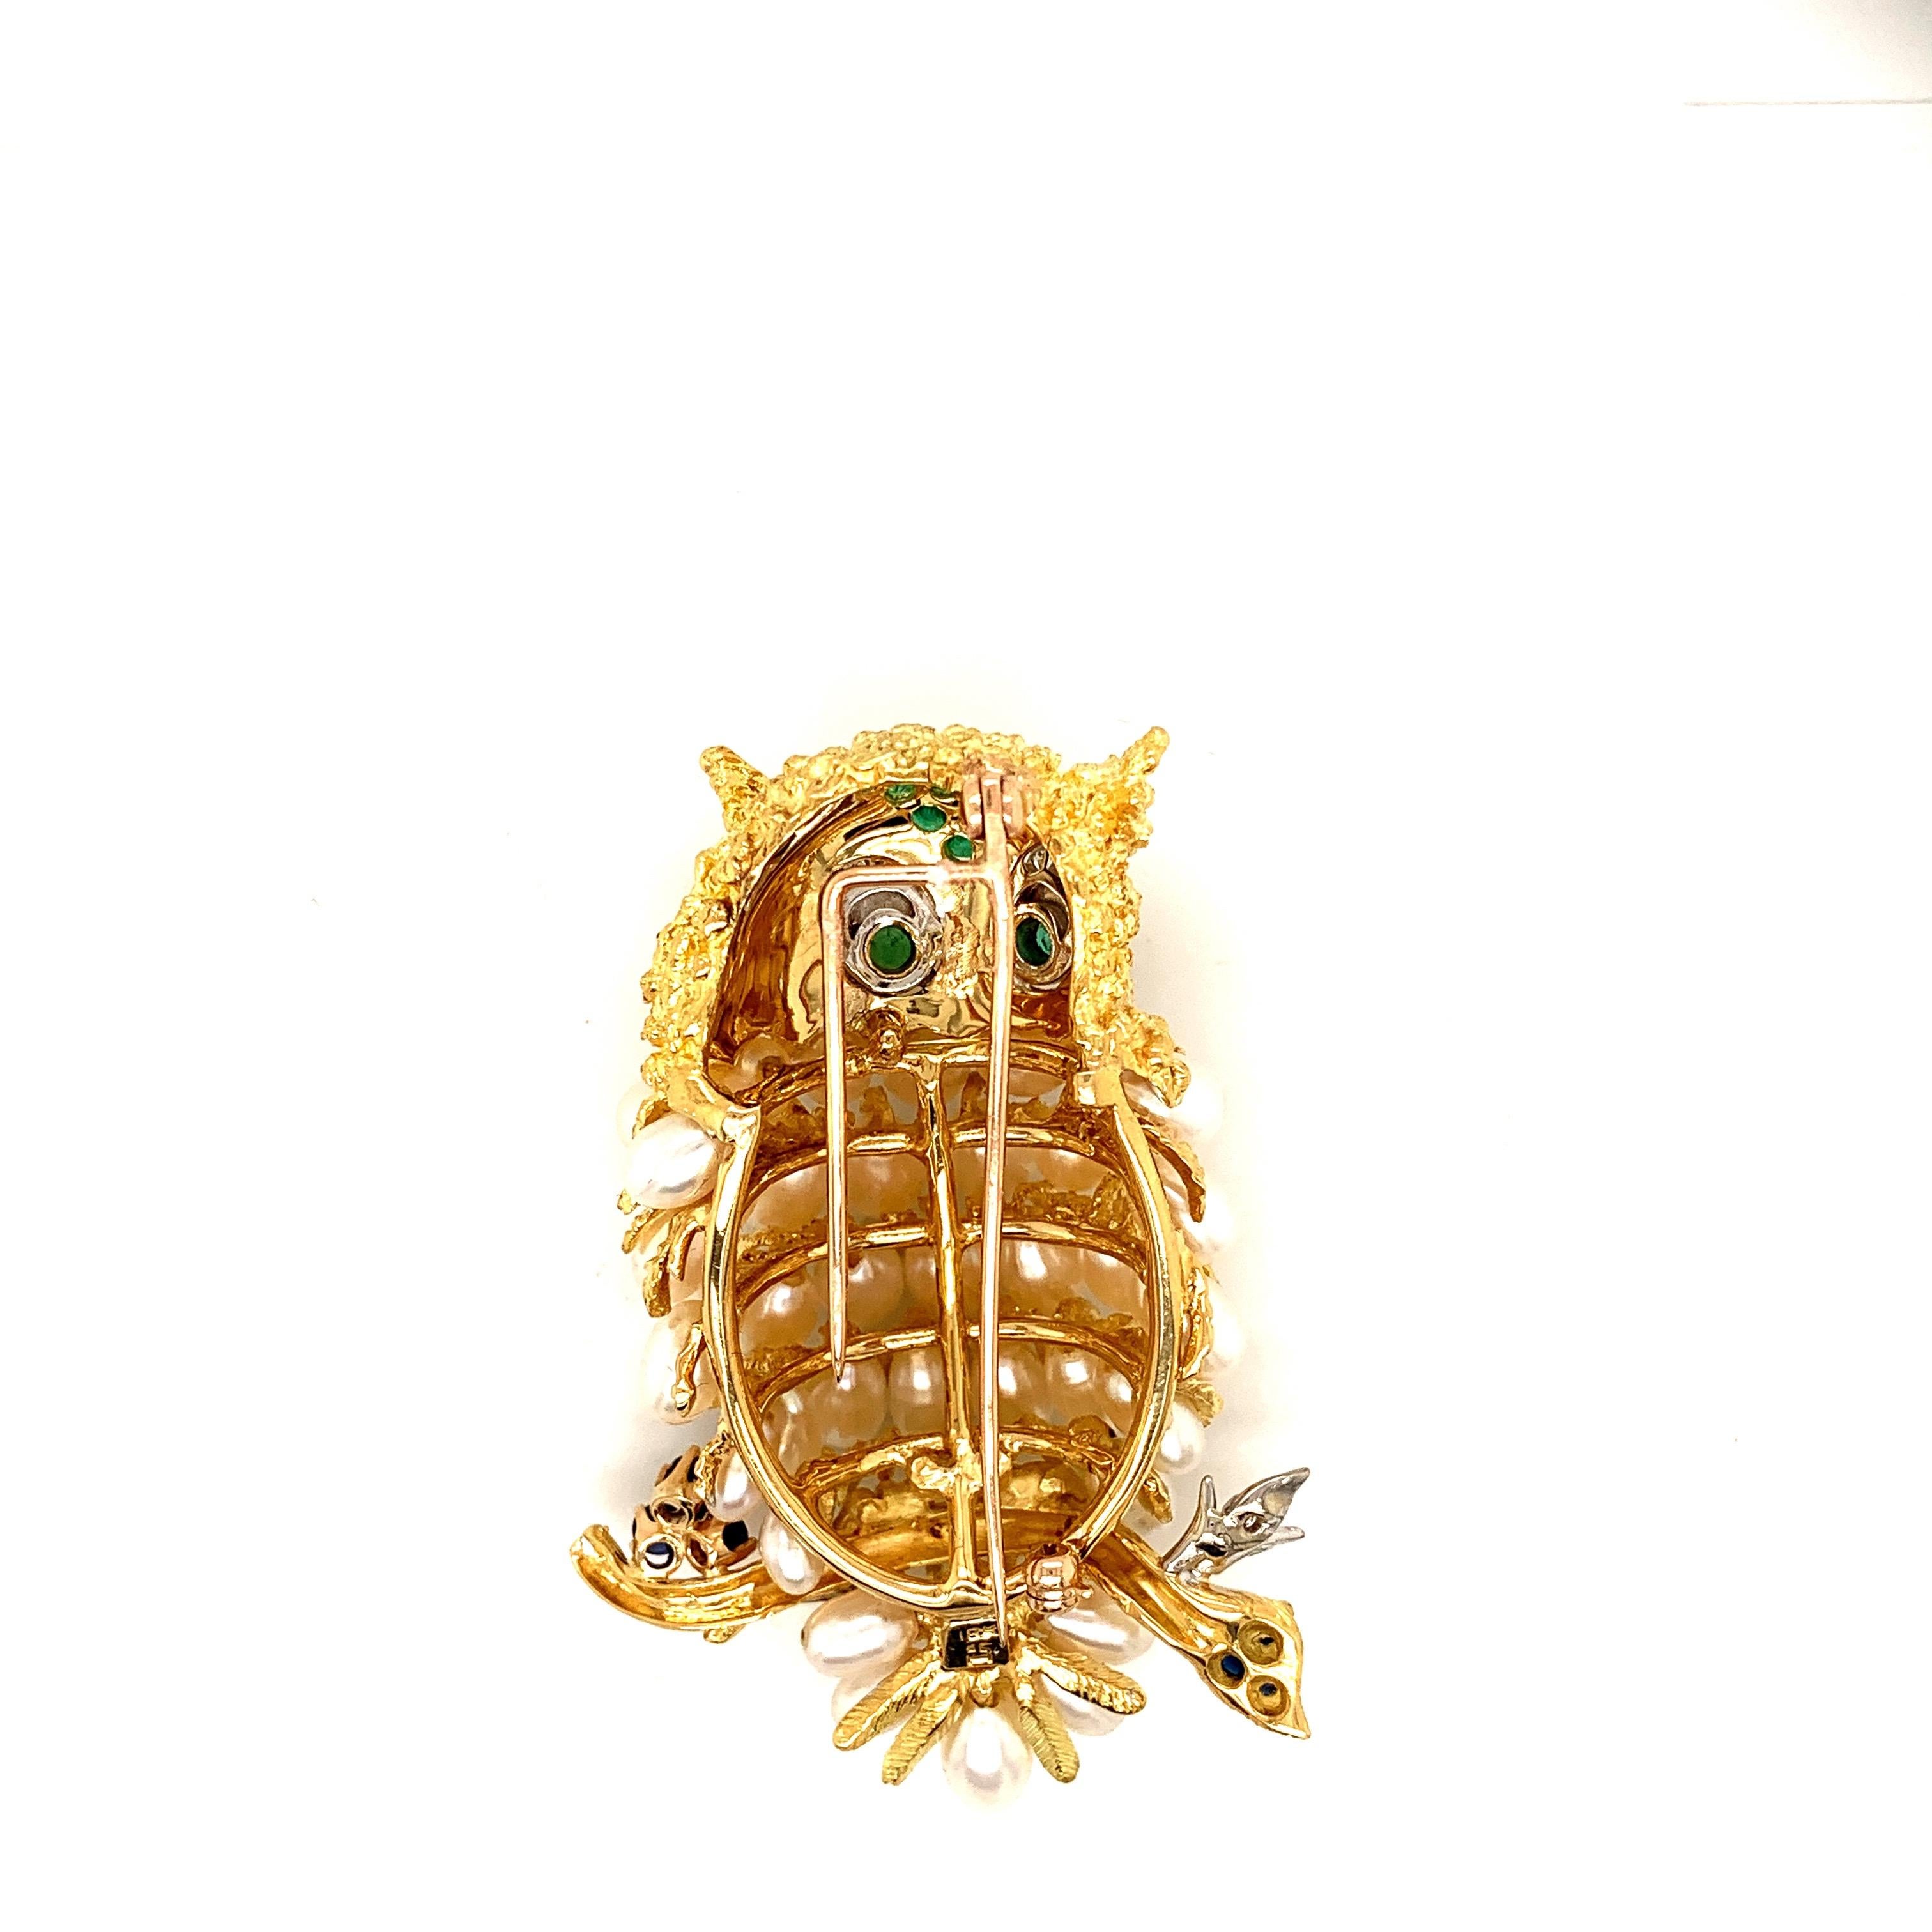 Stunning artistic creation. 
A testament to the imagination,talents,and creativity of the jewelers of yesteryear.
Combining precious gemstones; sapphires diamonds emeralds and pearls this remarkably alive looking owl is a charming find. 
A must add